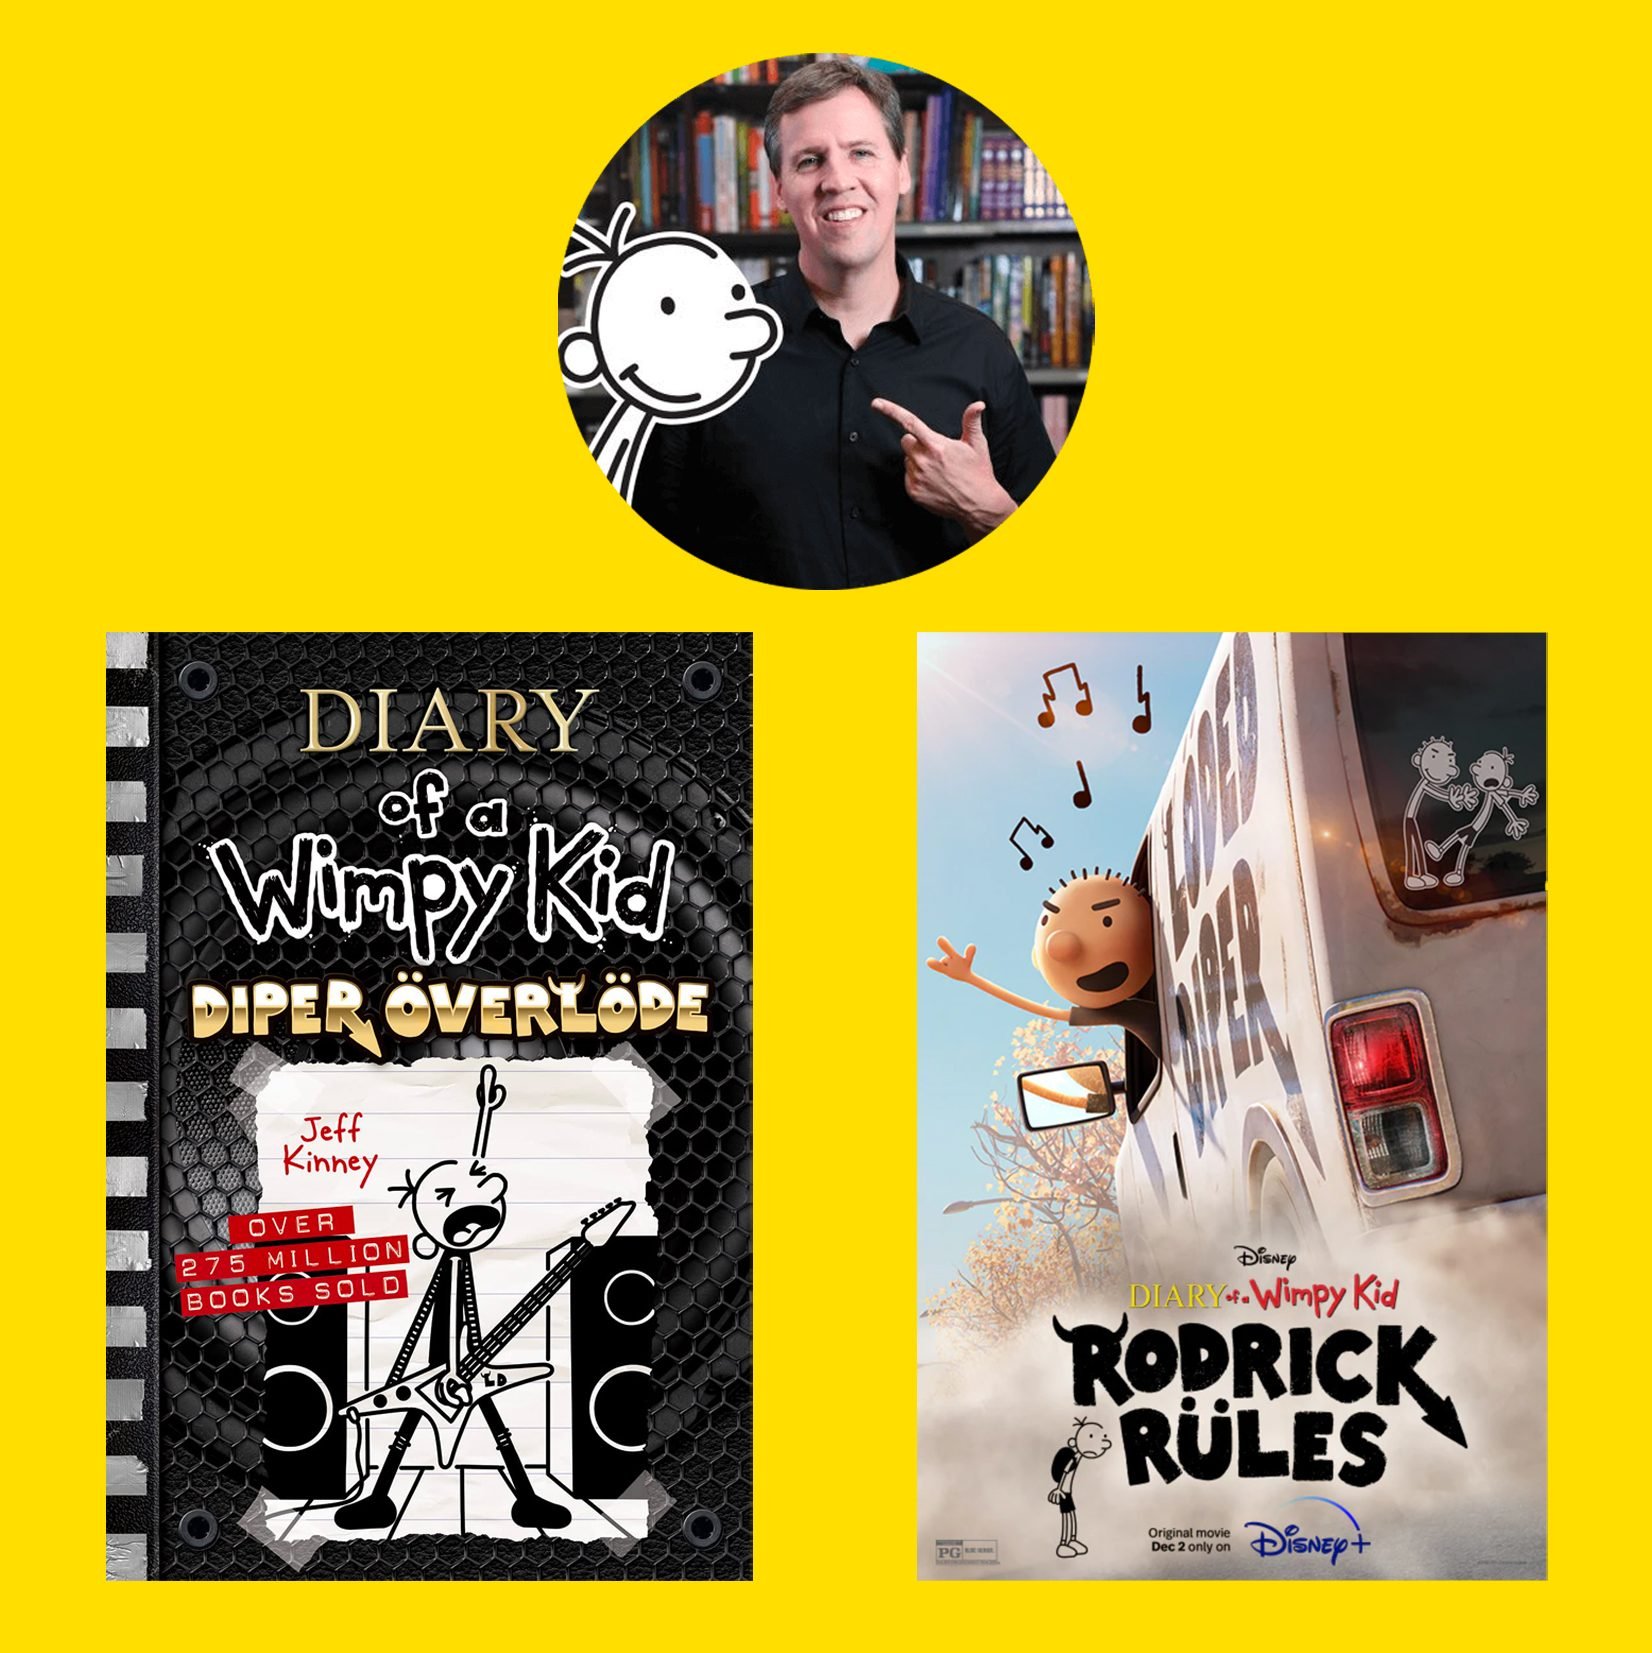 Jeff Kinney Talks the Diary of a Wimpy Kid New Book and Disney+